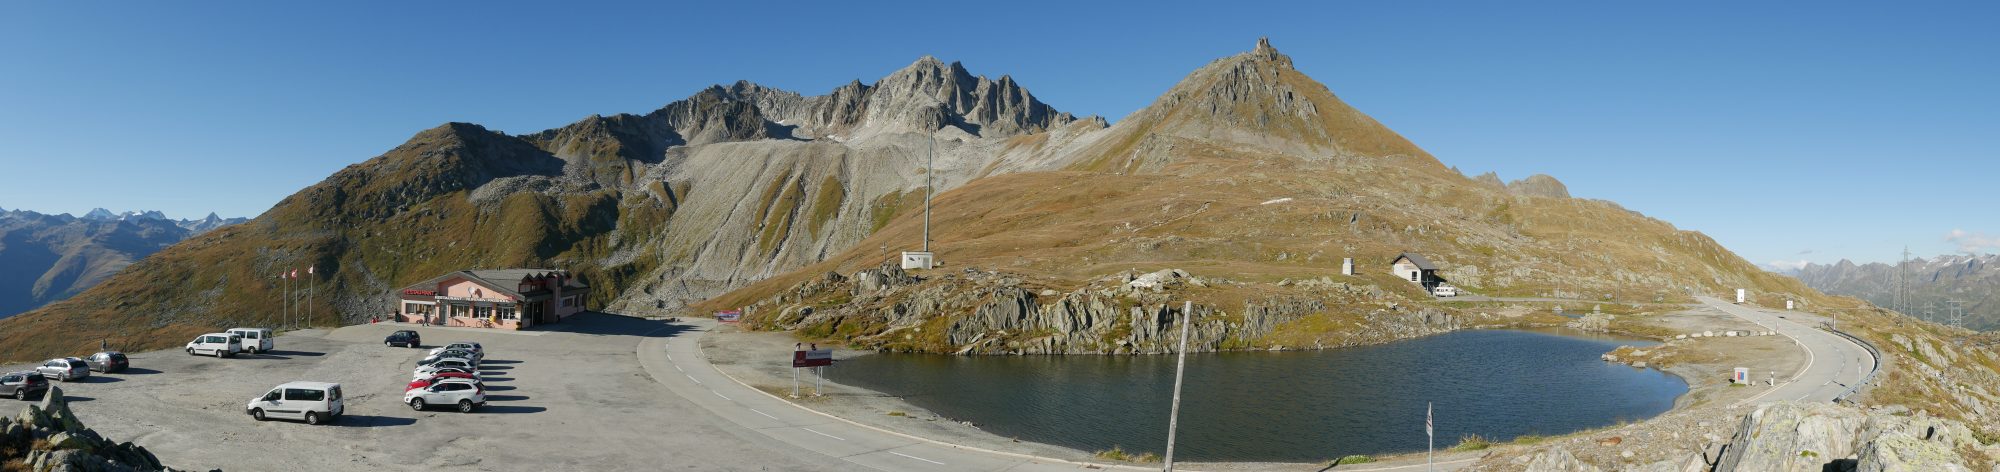 Panorama of Nufenenpass on a nice day. Photo: Alexander Hoernigk. A drive through the Nufenenpass (Passo della Novena) and Grimsel Pass in Switzerland.